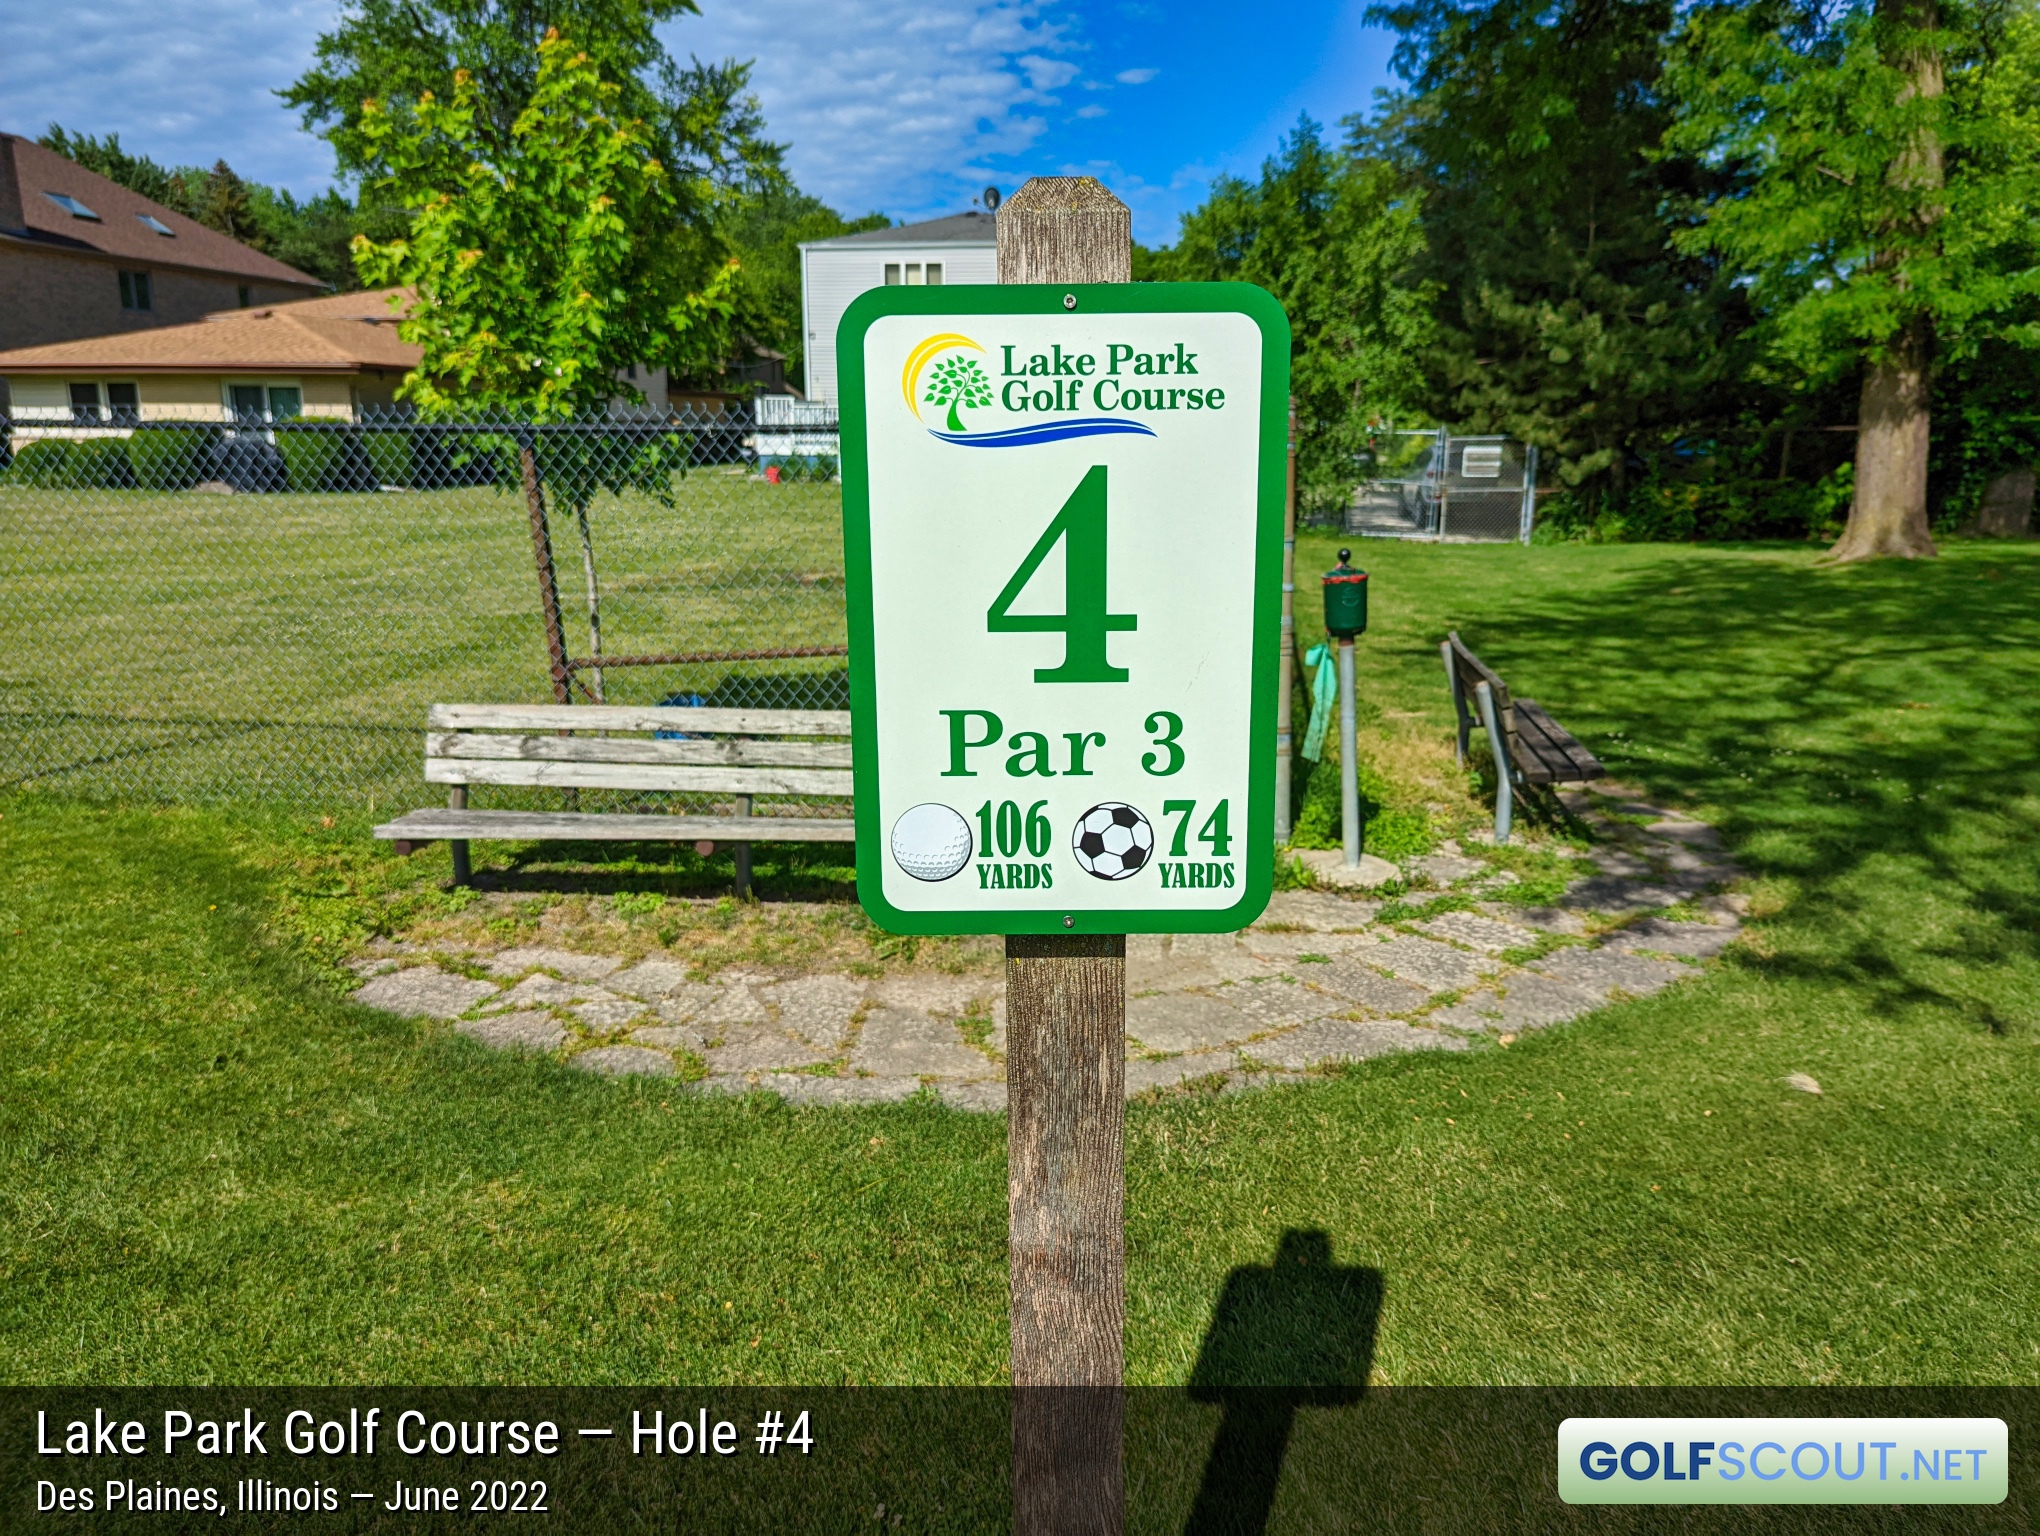 Photo of hole #4 at Lake Park Golf Course in Des Plaines, Illinois. 